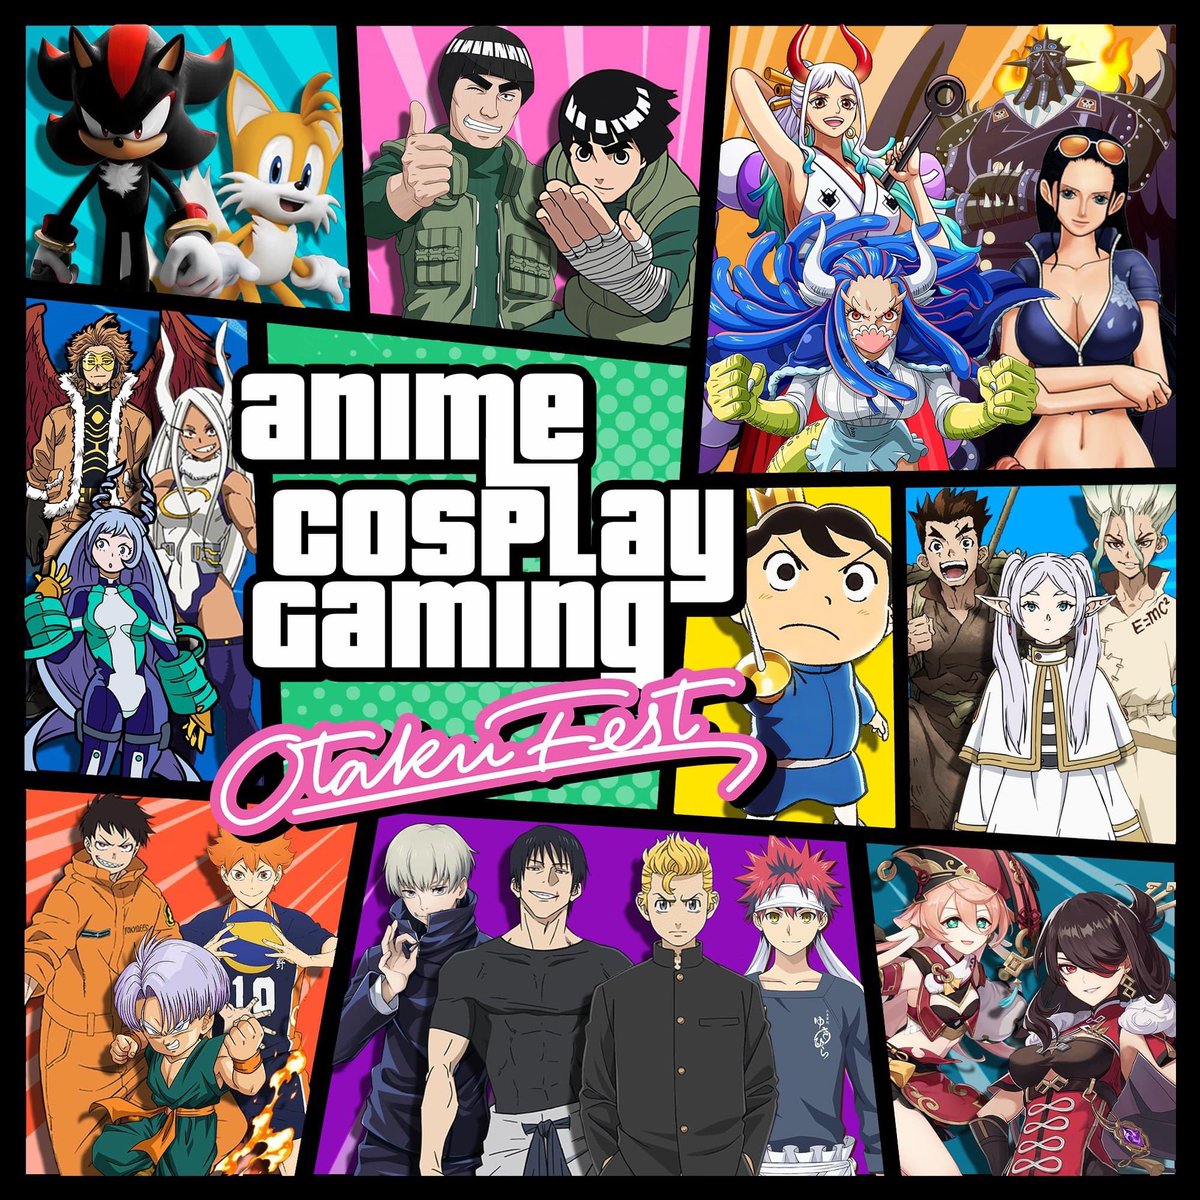 🎟️Last chance to unlock 15% Off on Gen Adm Tix for OtakuFest—the ultimate celebration of anime, gaming, and all things geek! 🎮🎨🎟️ 🎟Use Code OTAKU15 to SAVE 15% off tix until April 1 @ 11:59p! Tickets won’t be this CHEAP again, get yours TODAY! 🎟Tix: otakufest.com/tickets